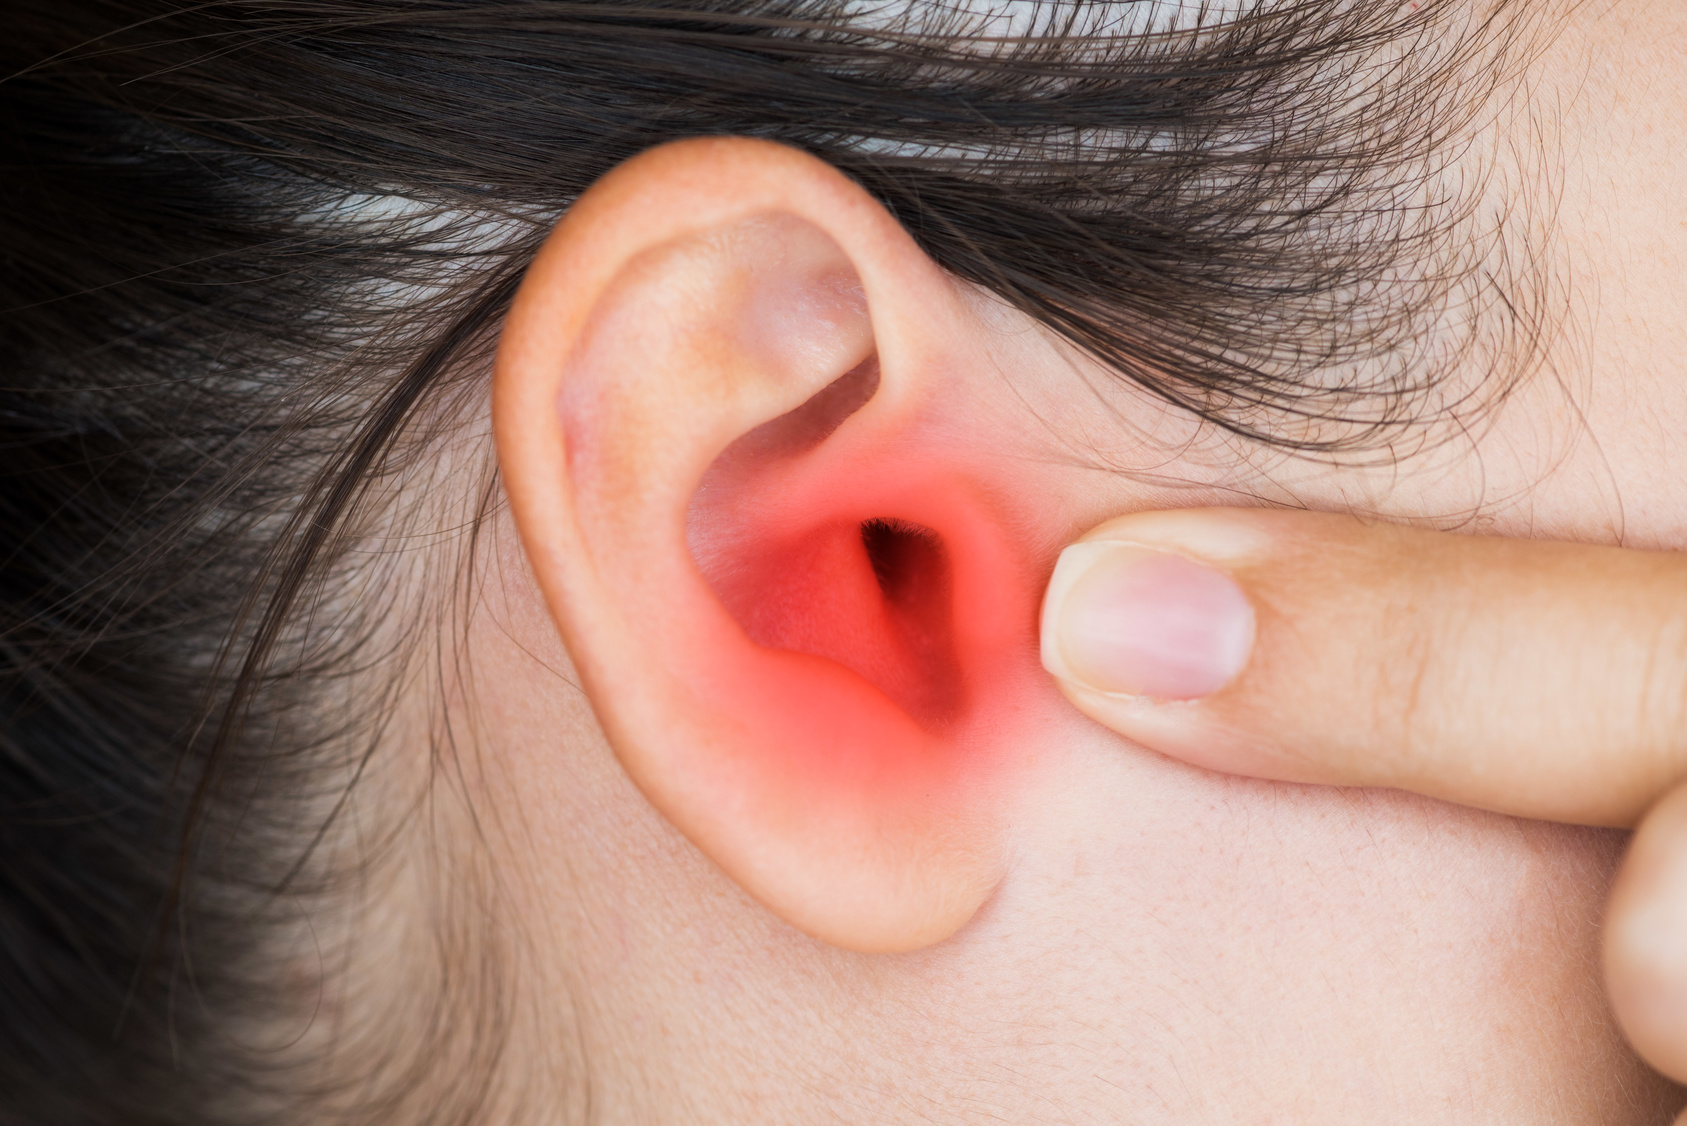 Closeup of a human ear with red painful area - Young woman has pain in the ear